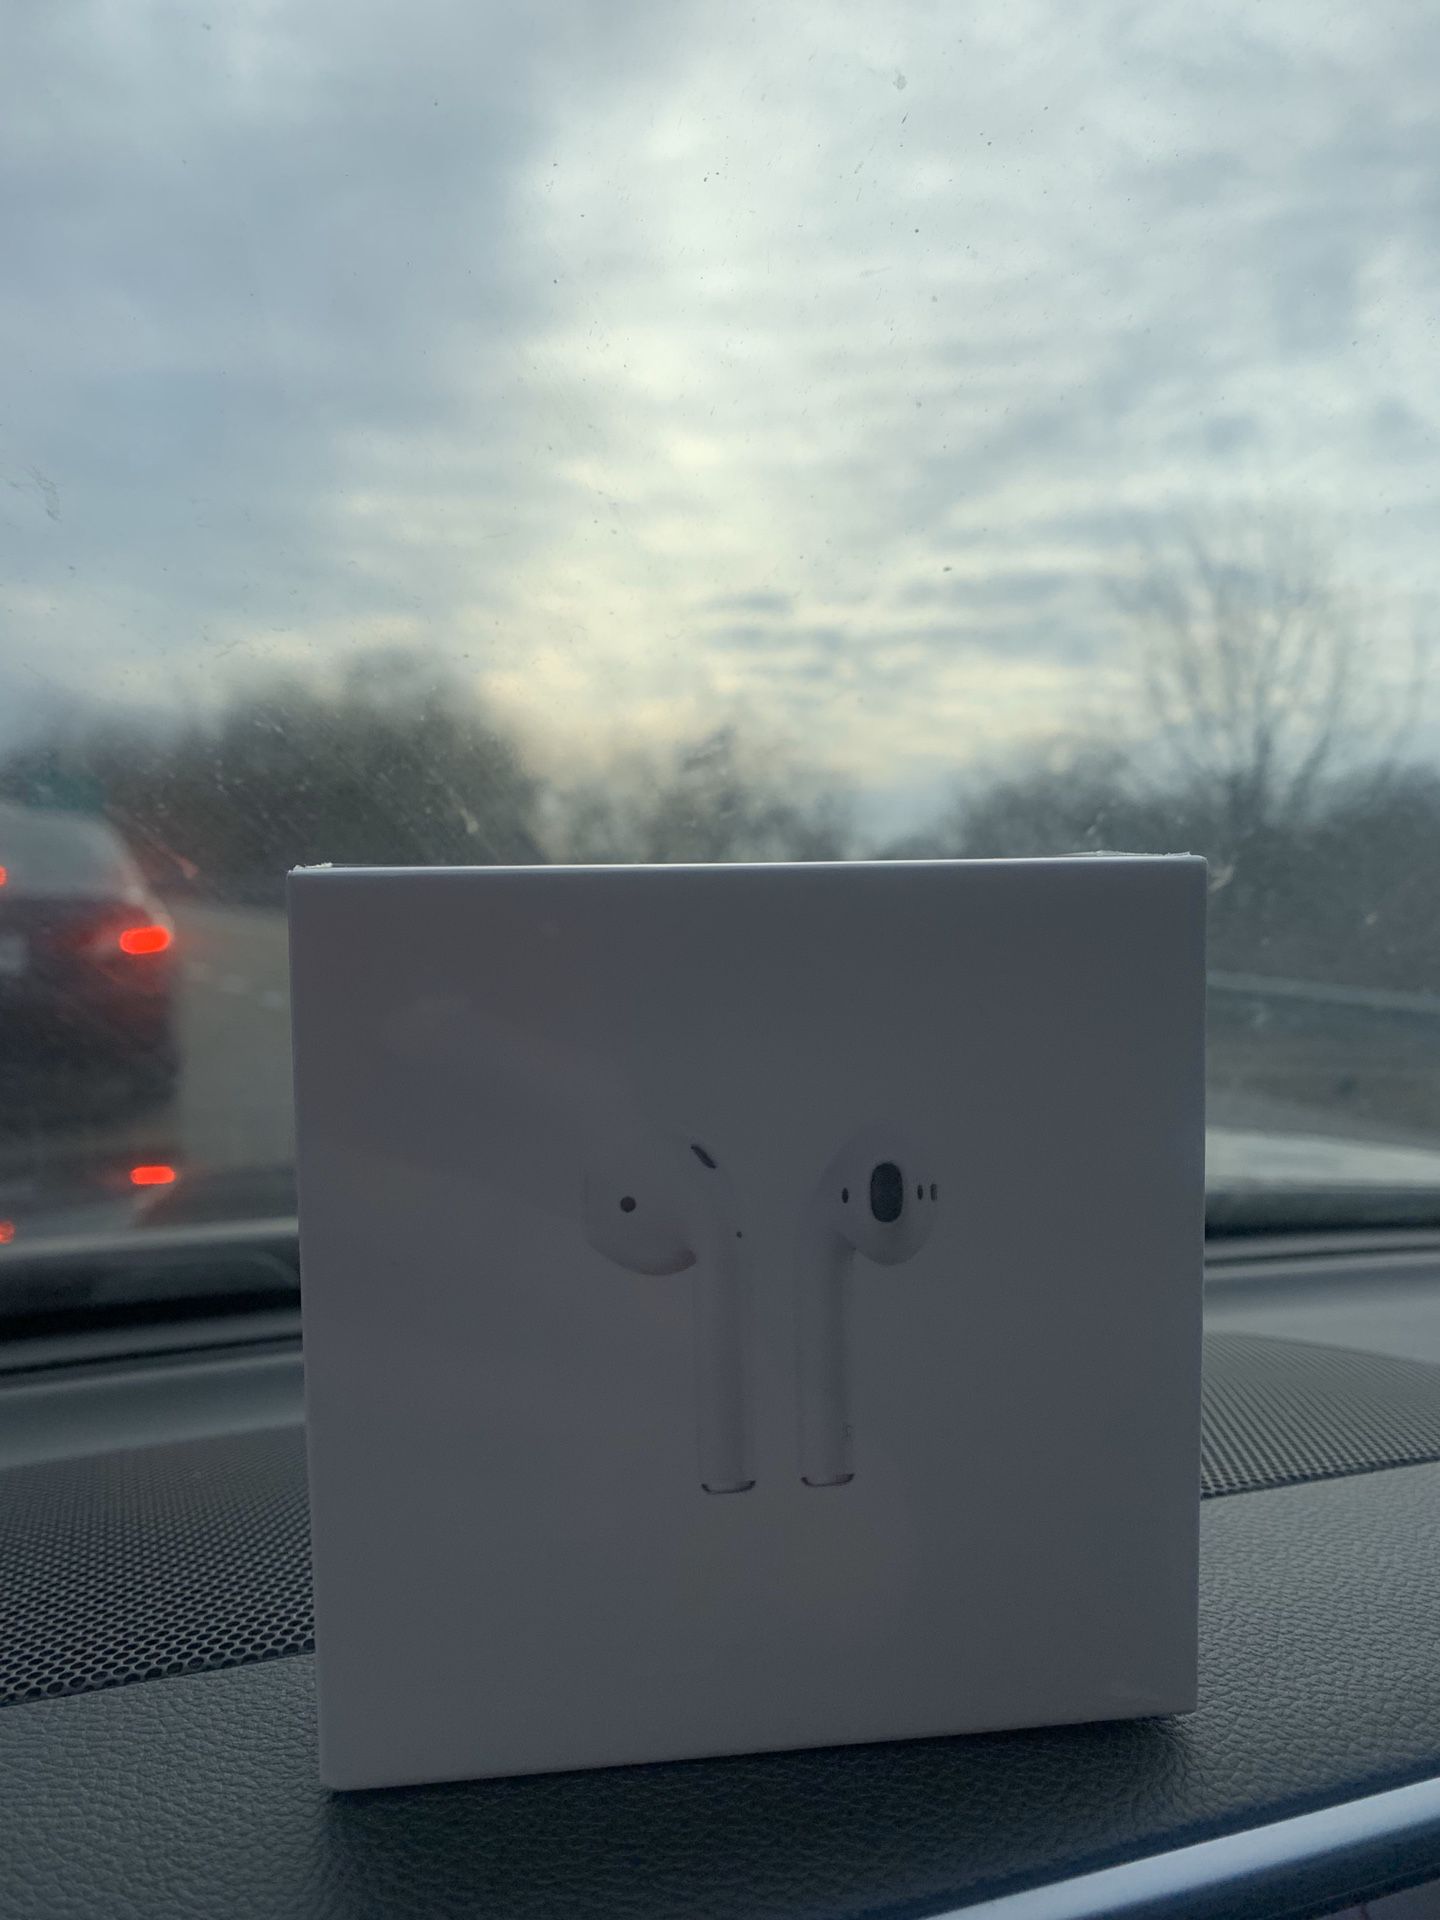 $199 AIRPODS 2ND GENERATION FOR $100 *WIRELESS CHARGING* UNOPEN